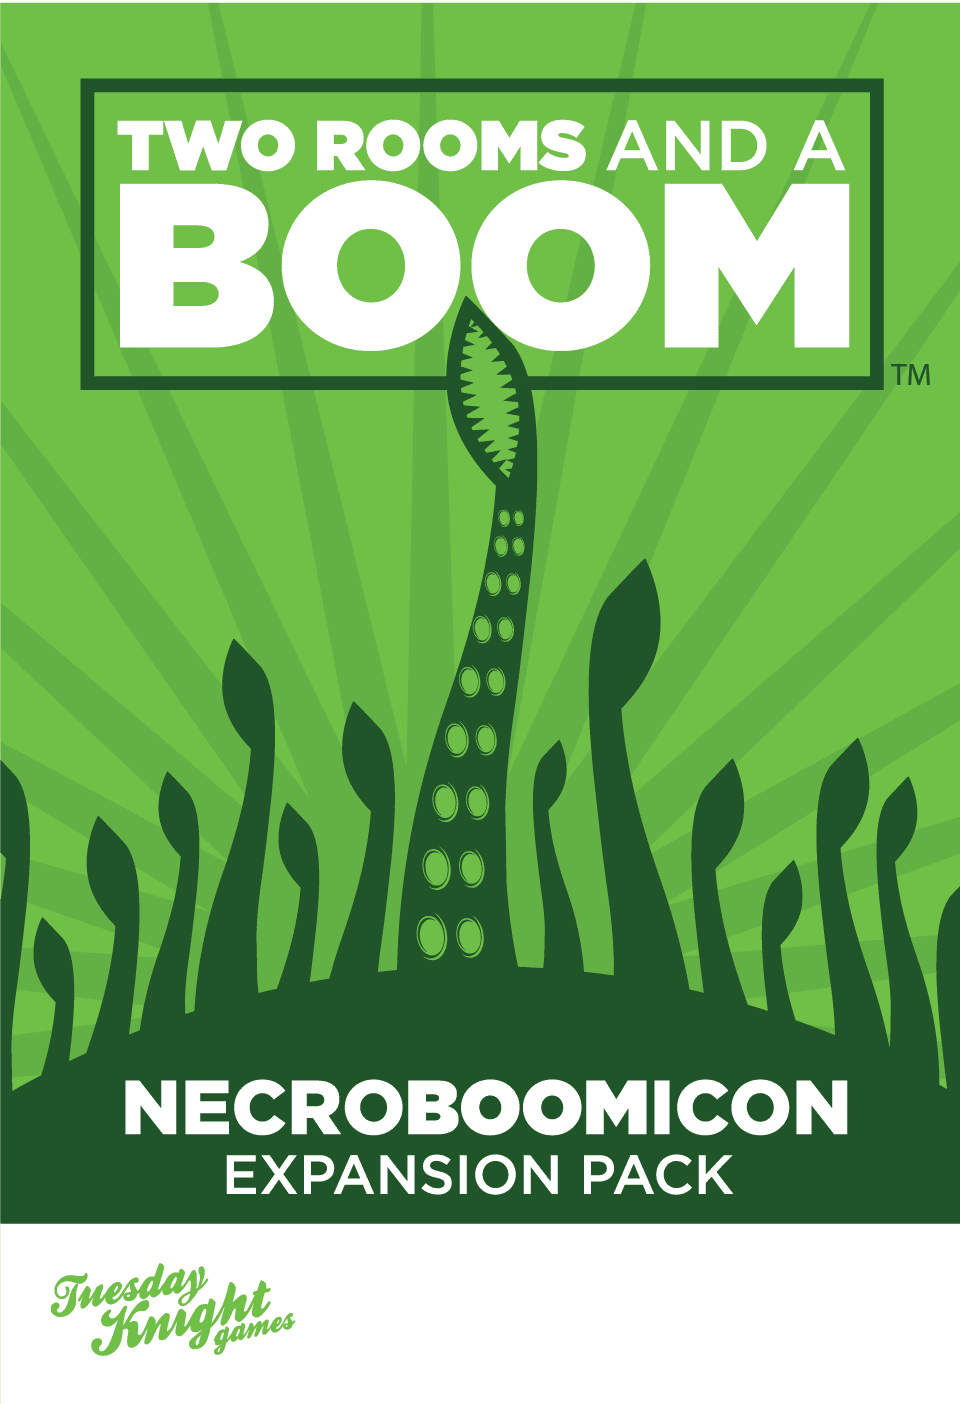 Two Rooms and a Boom: Necroboomicon Expansion Pack